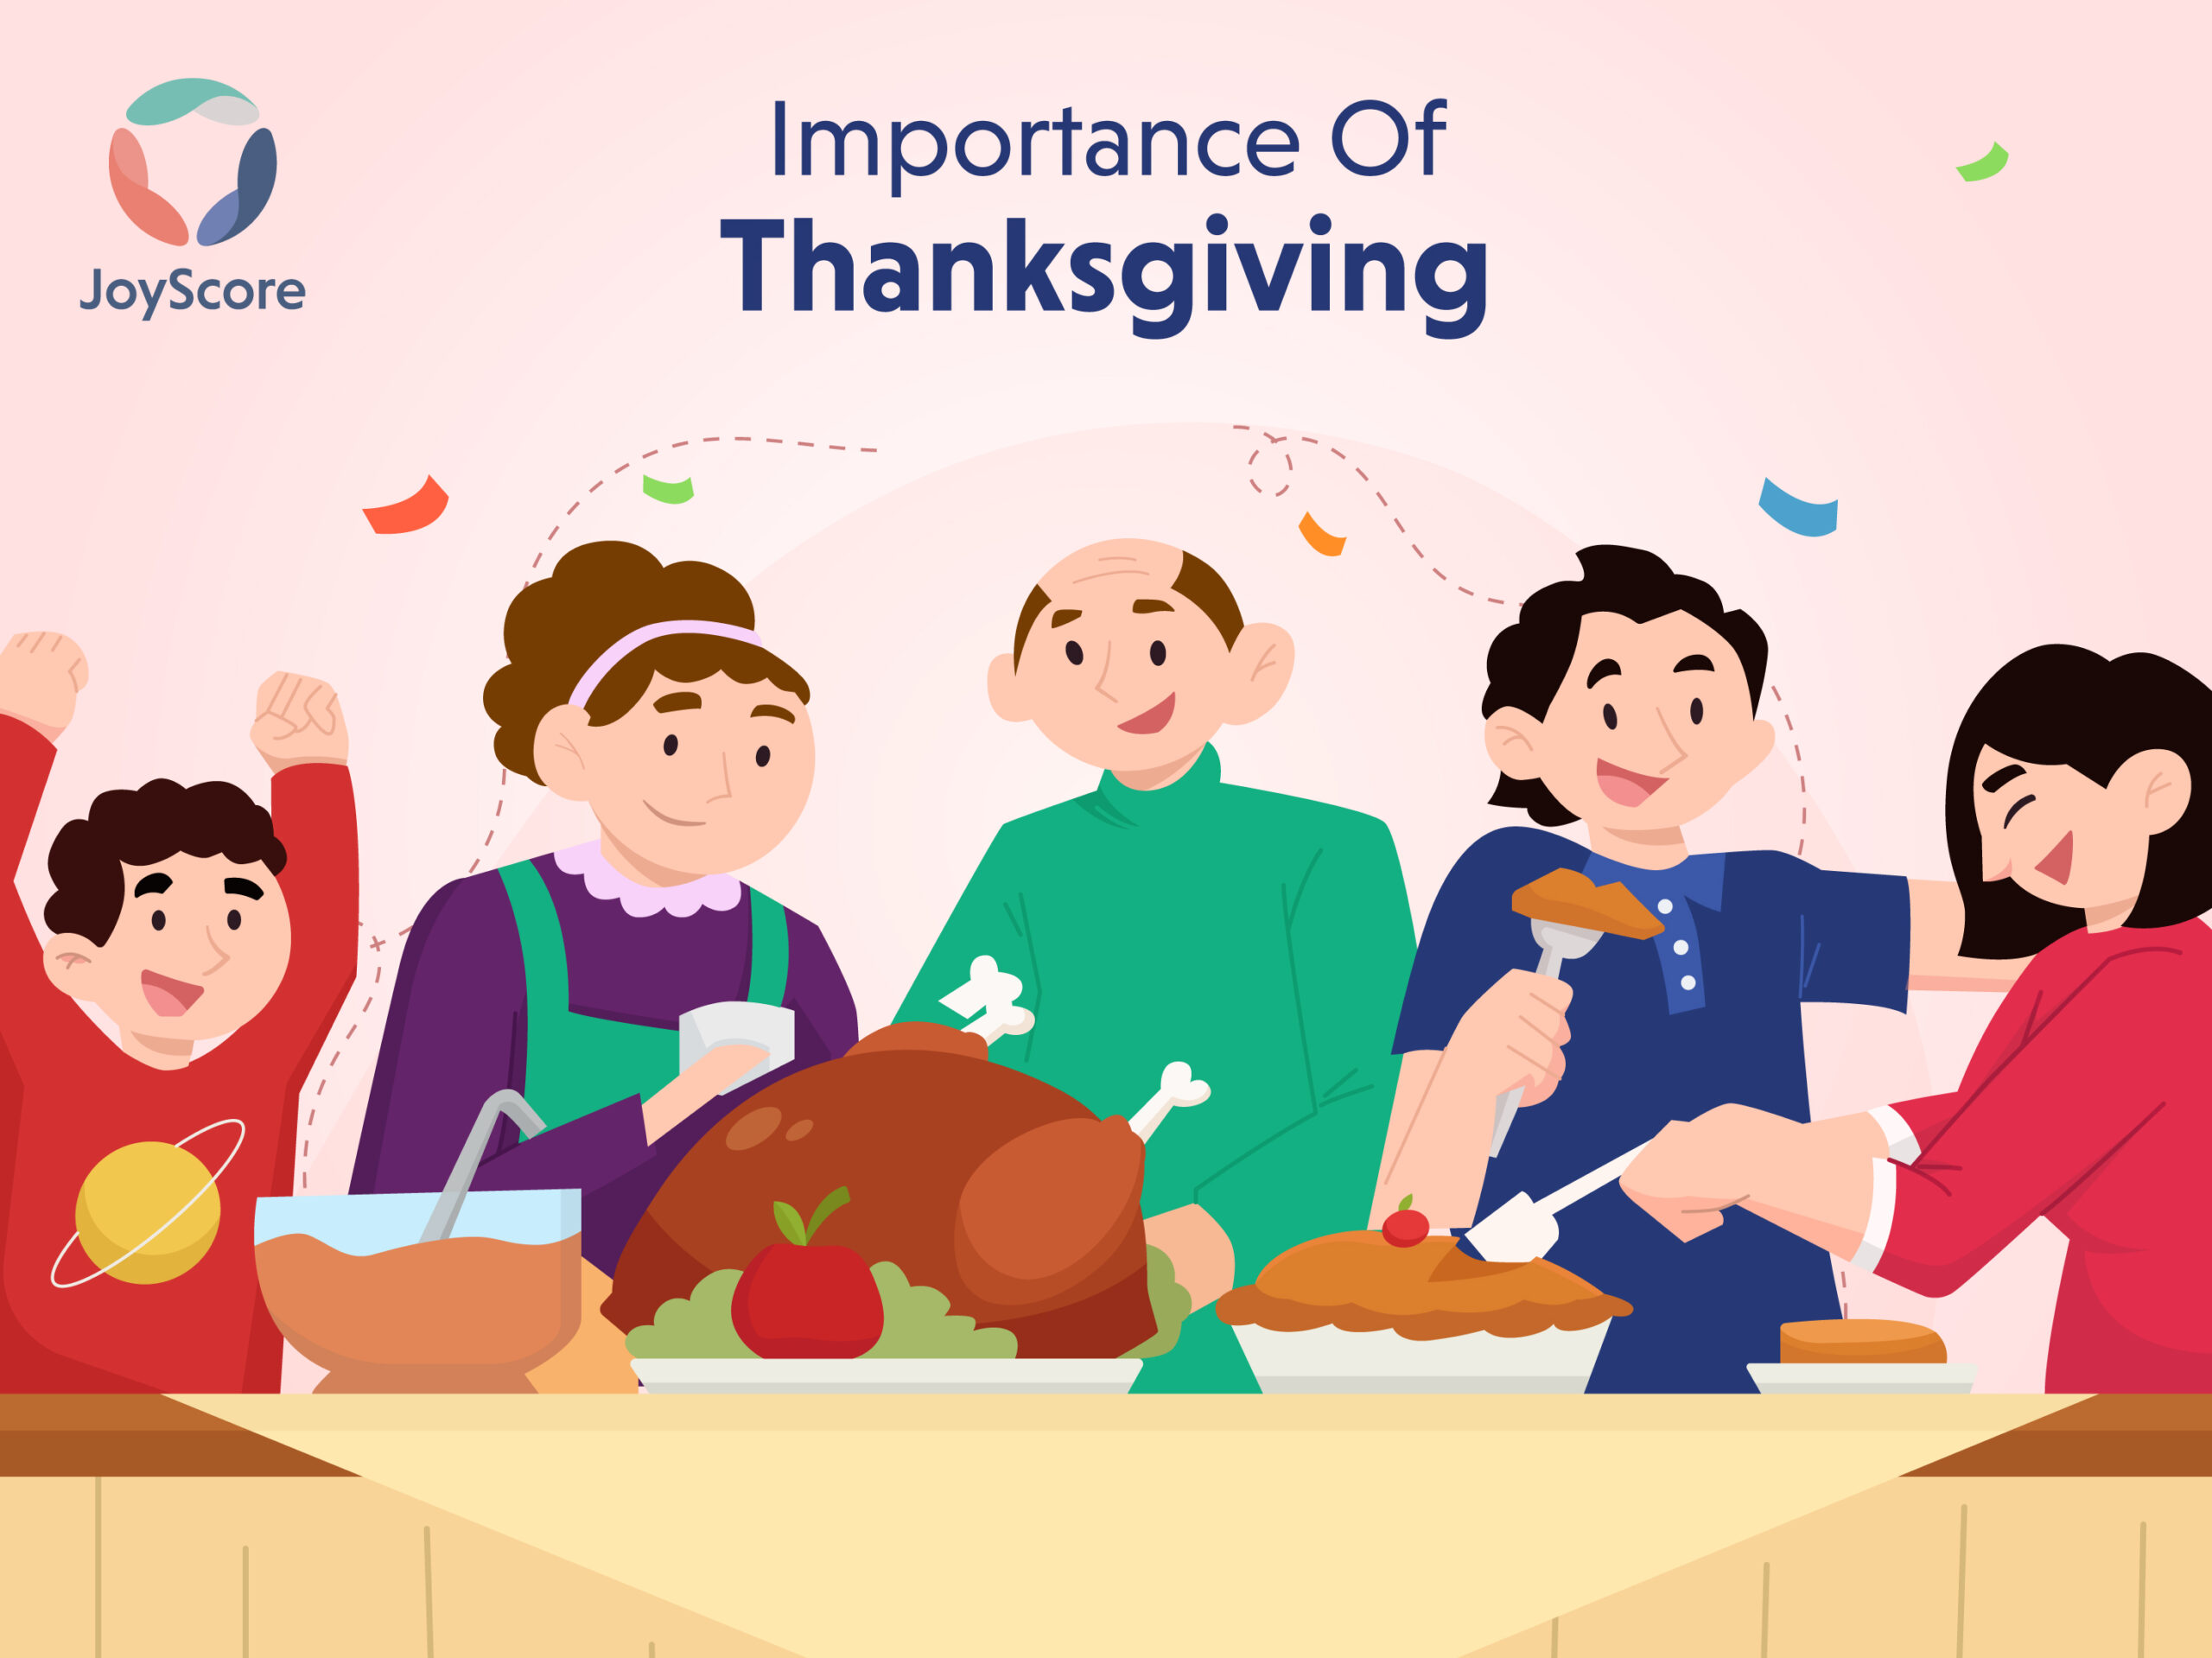 Importance Of Thanksgiving: Let’s Make It An Everyday Thing